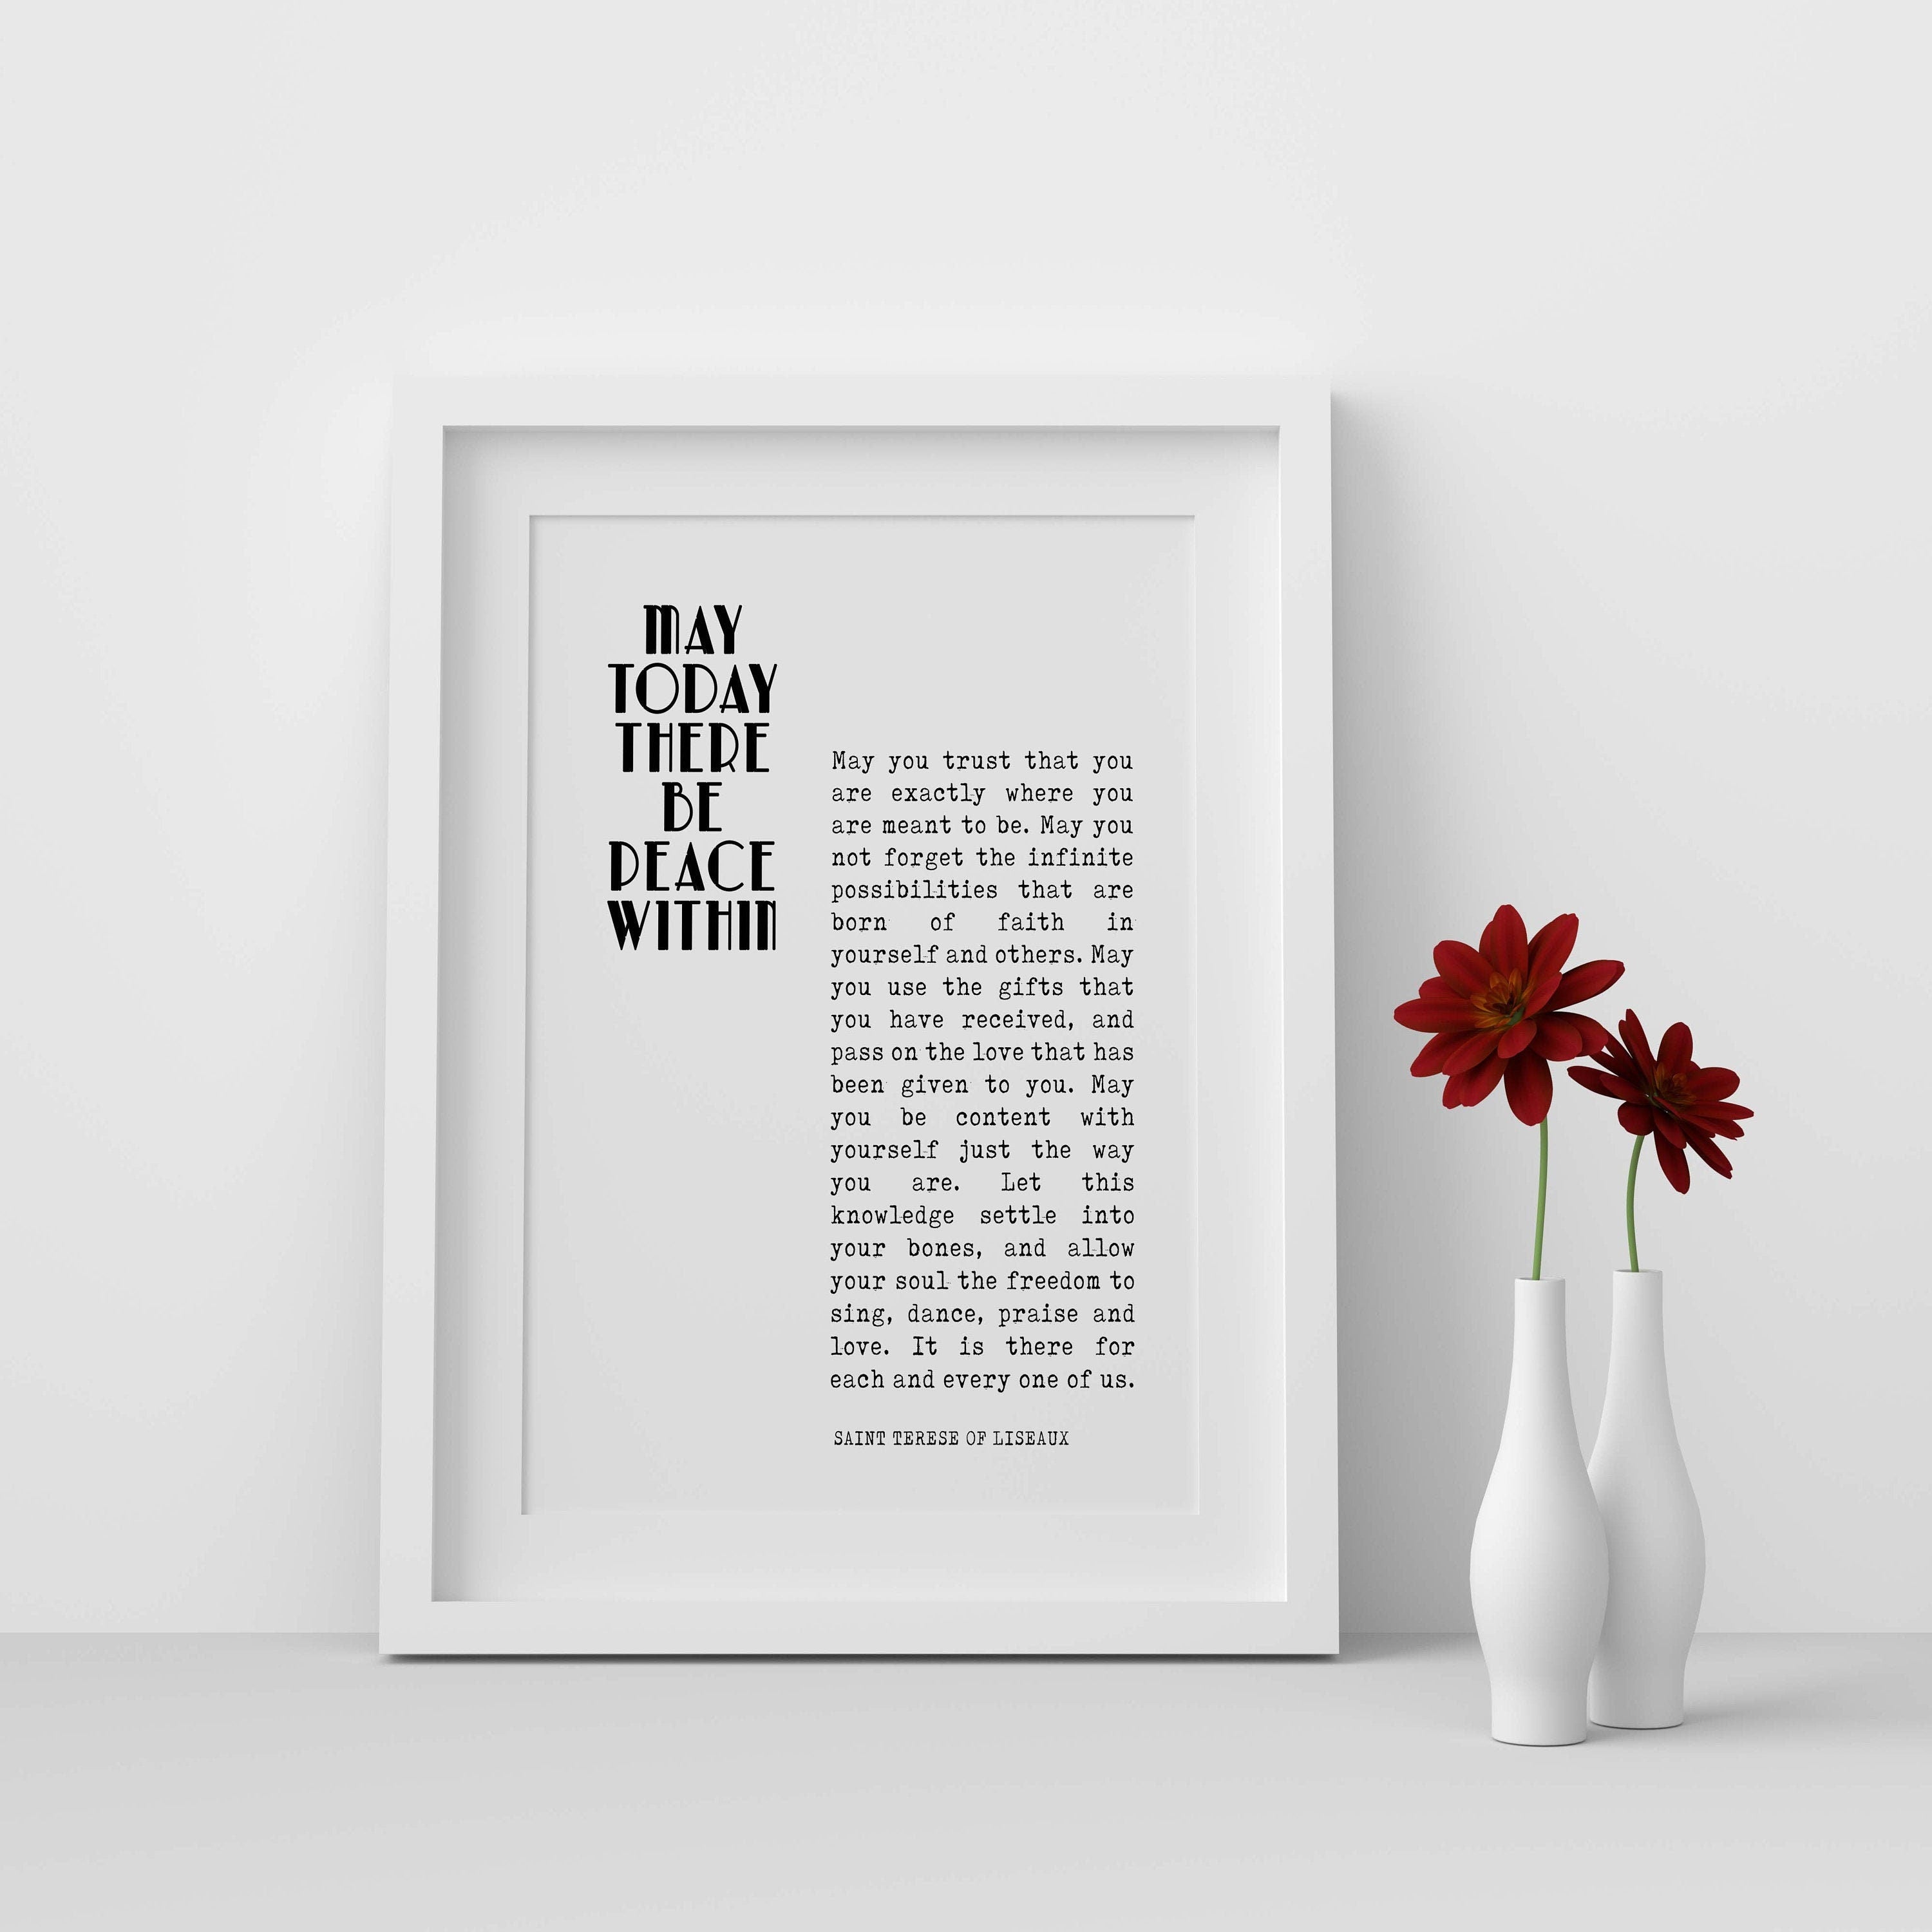 St Therese Of Lisieux Peace Quote Print In Black & White, May Today There Be Peace Within Unframed Inspirational Quote Wall Art Print